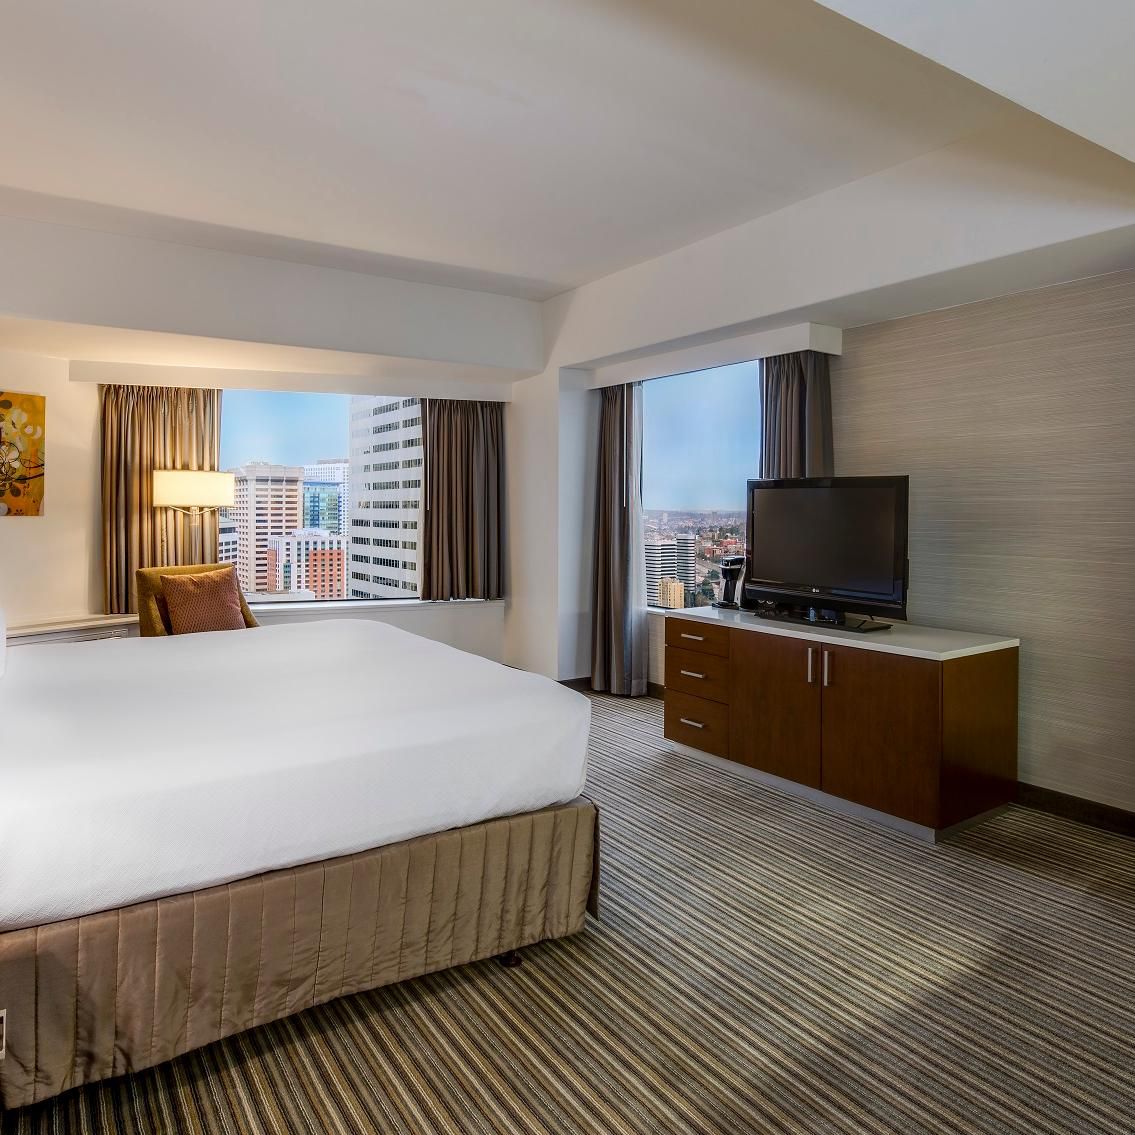 Our spacious guest rooms offer expansive views of Seattle.